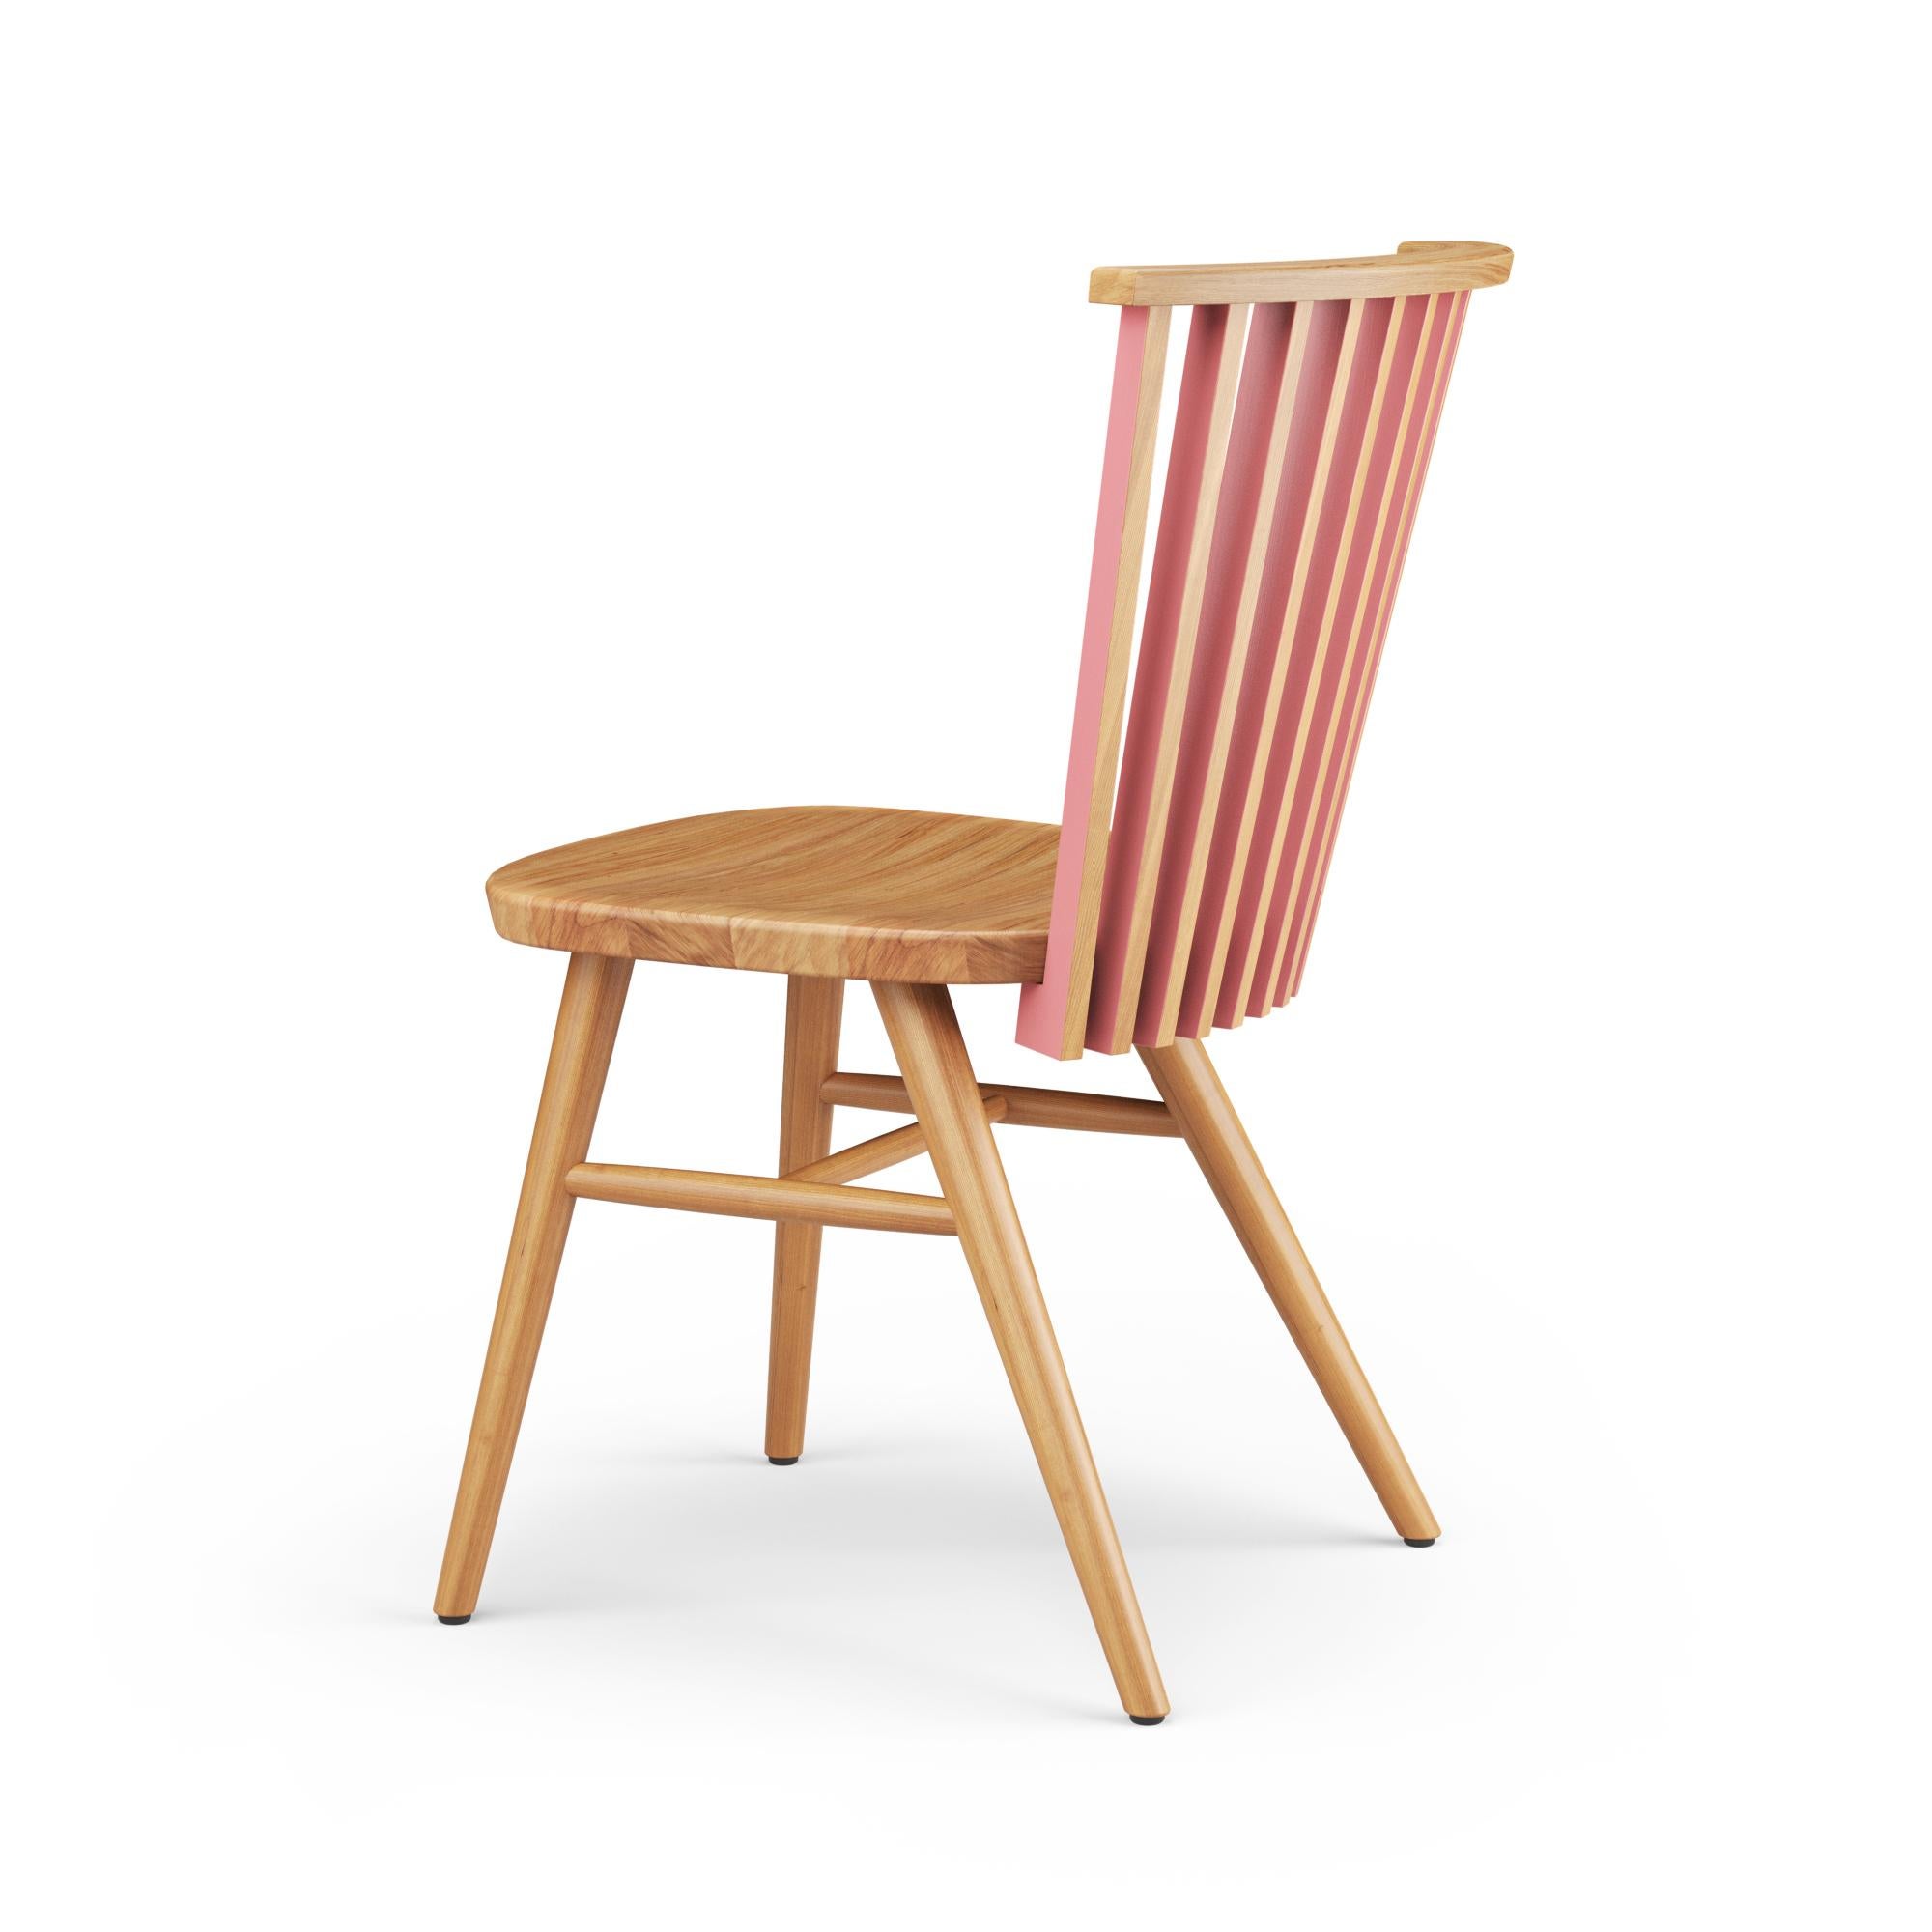 The Tornasol Chair captivates with its ingenious use of solid oak and color, creating a dynamic and visually engaging seating experience. The wooden backrest is composed of several flat solid wood components, each featuring a different color on